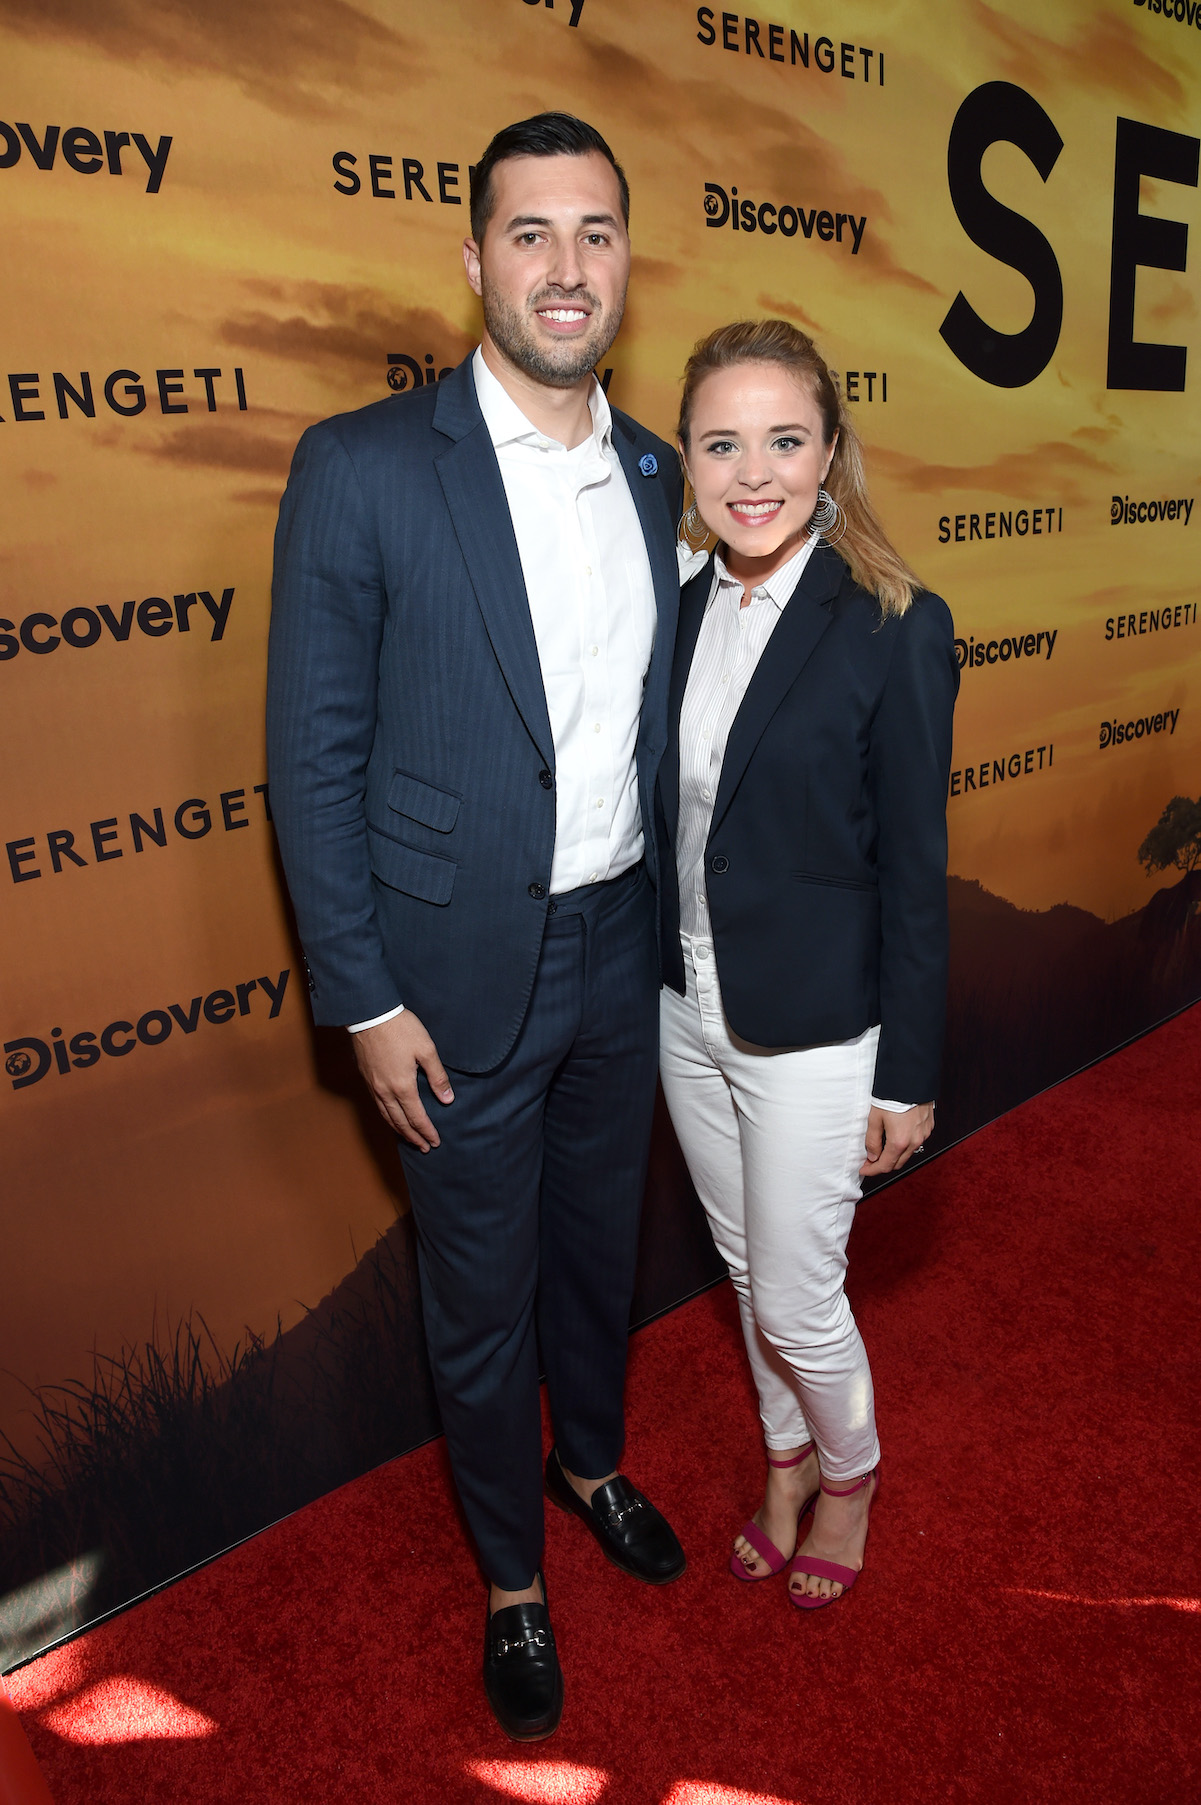 'Counting On' stars Jinger Duggar and Jeremy Vuolo in 2019